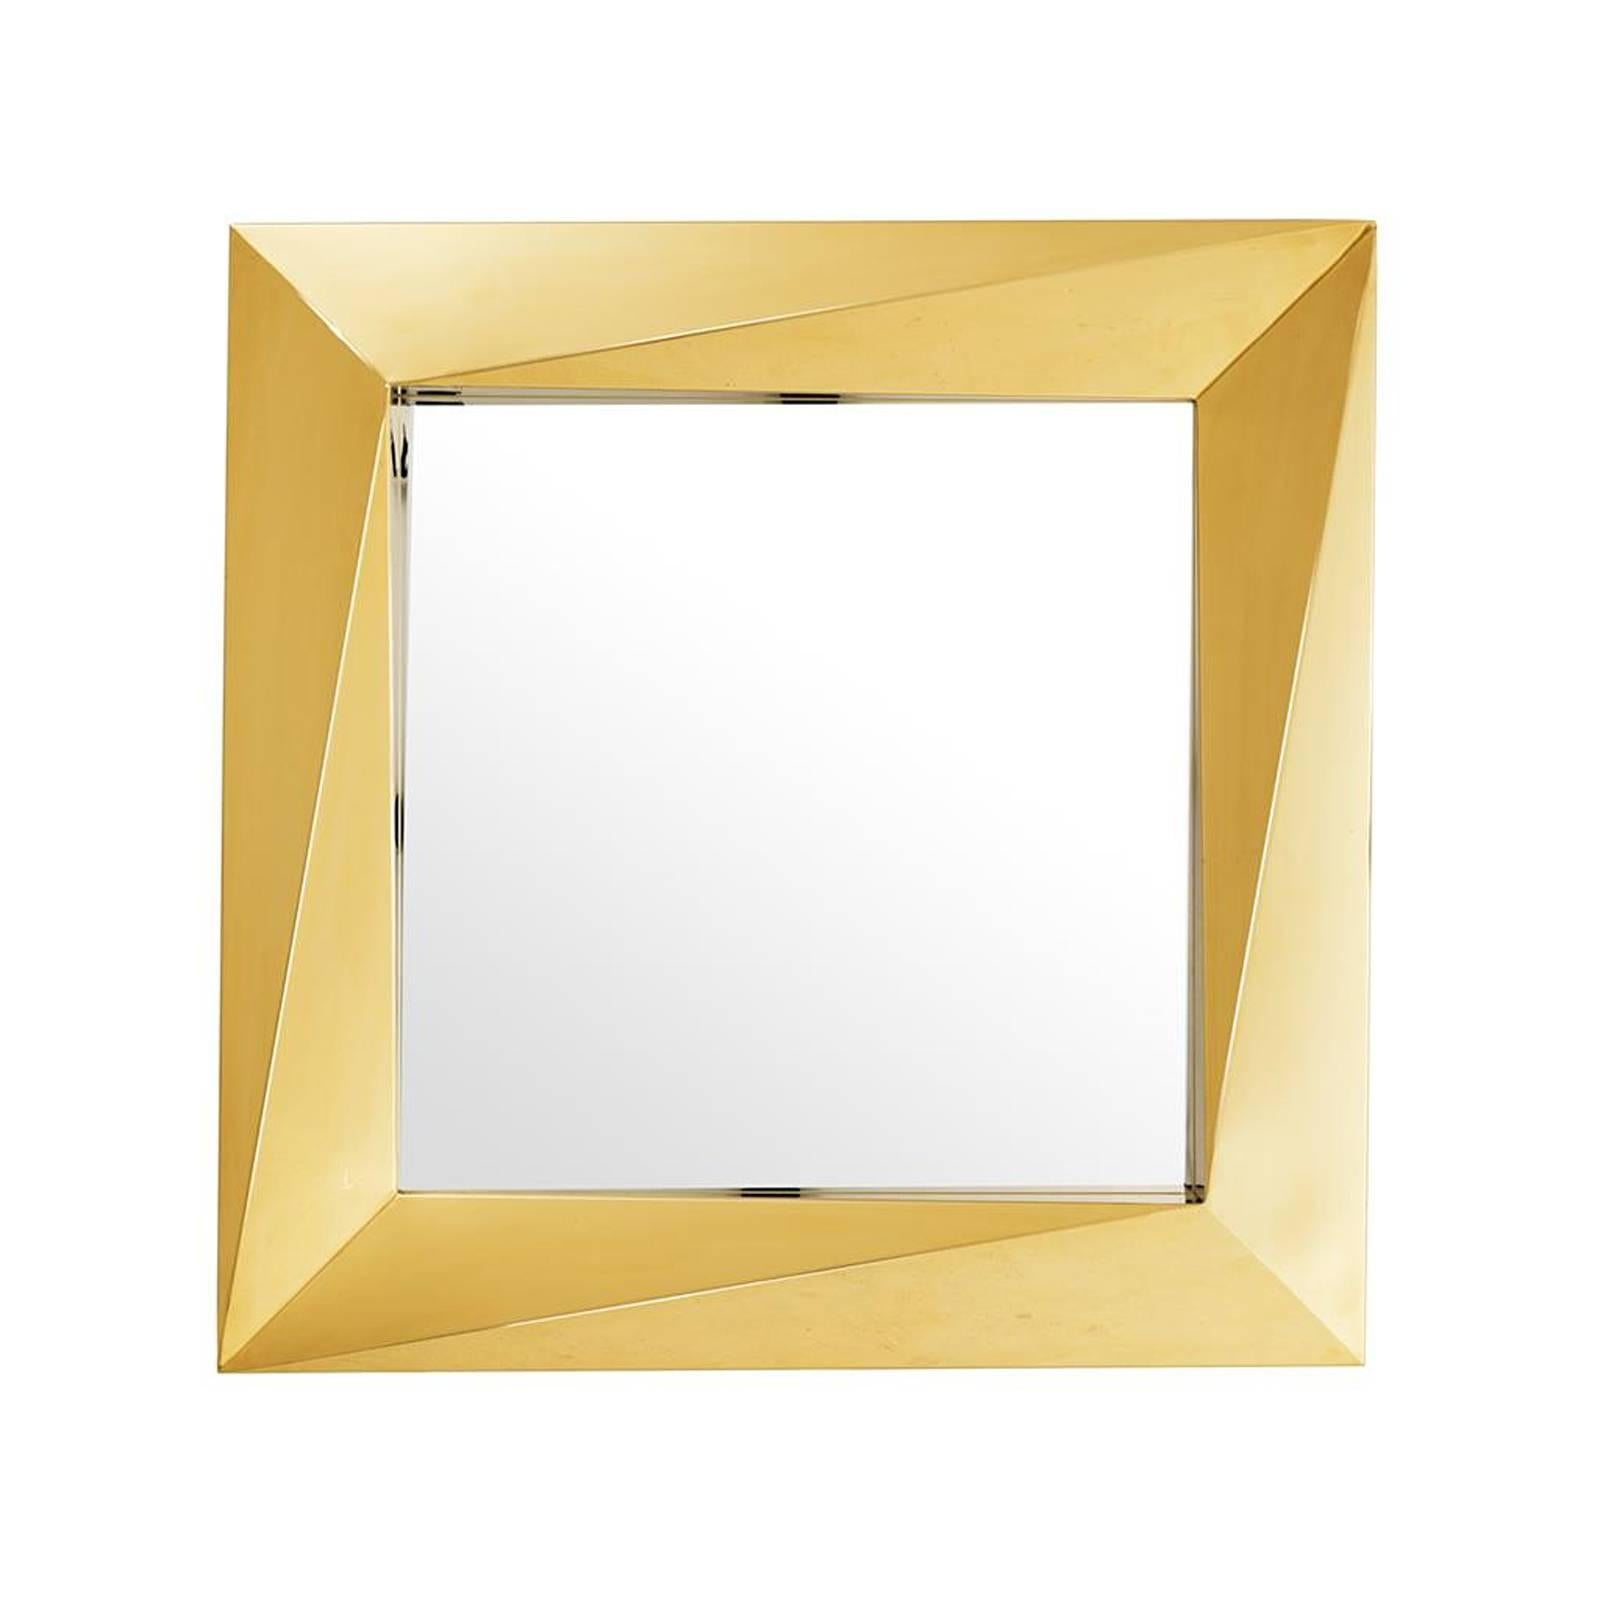 Dutch Axis Square Mirror in Gold Finish or in Polished Stainless Steel